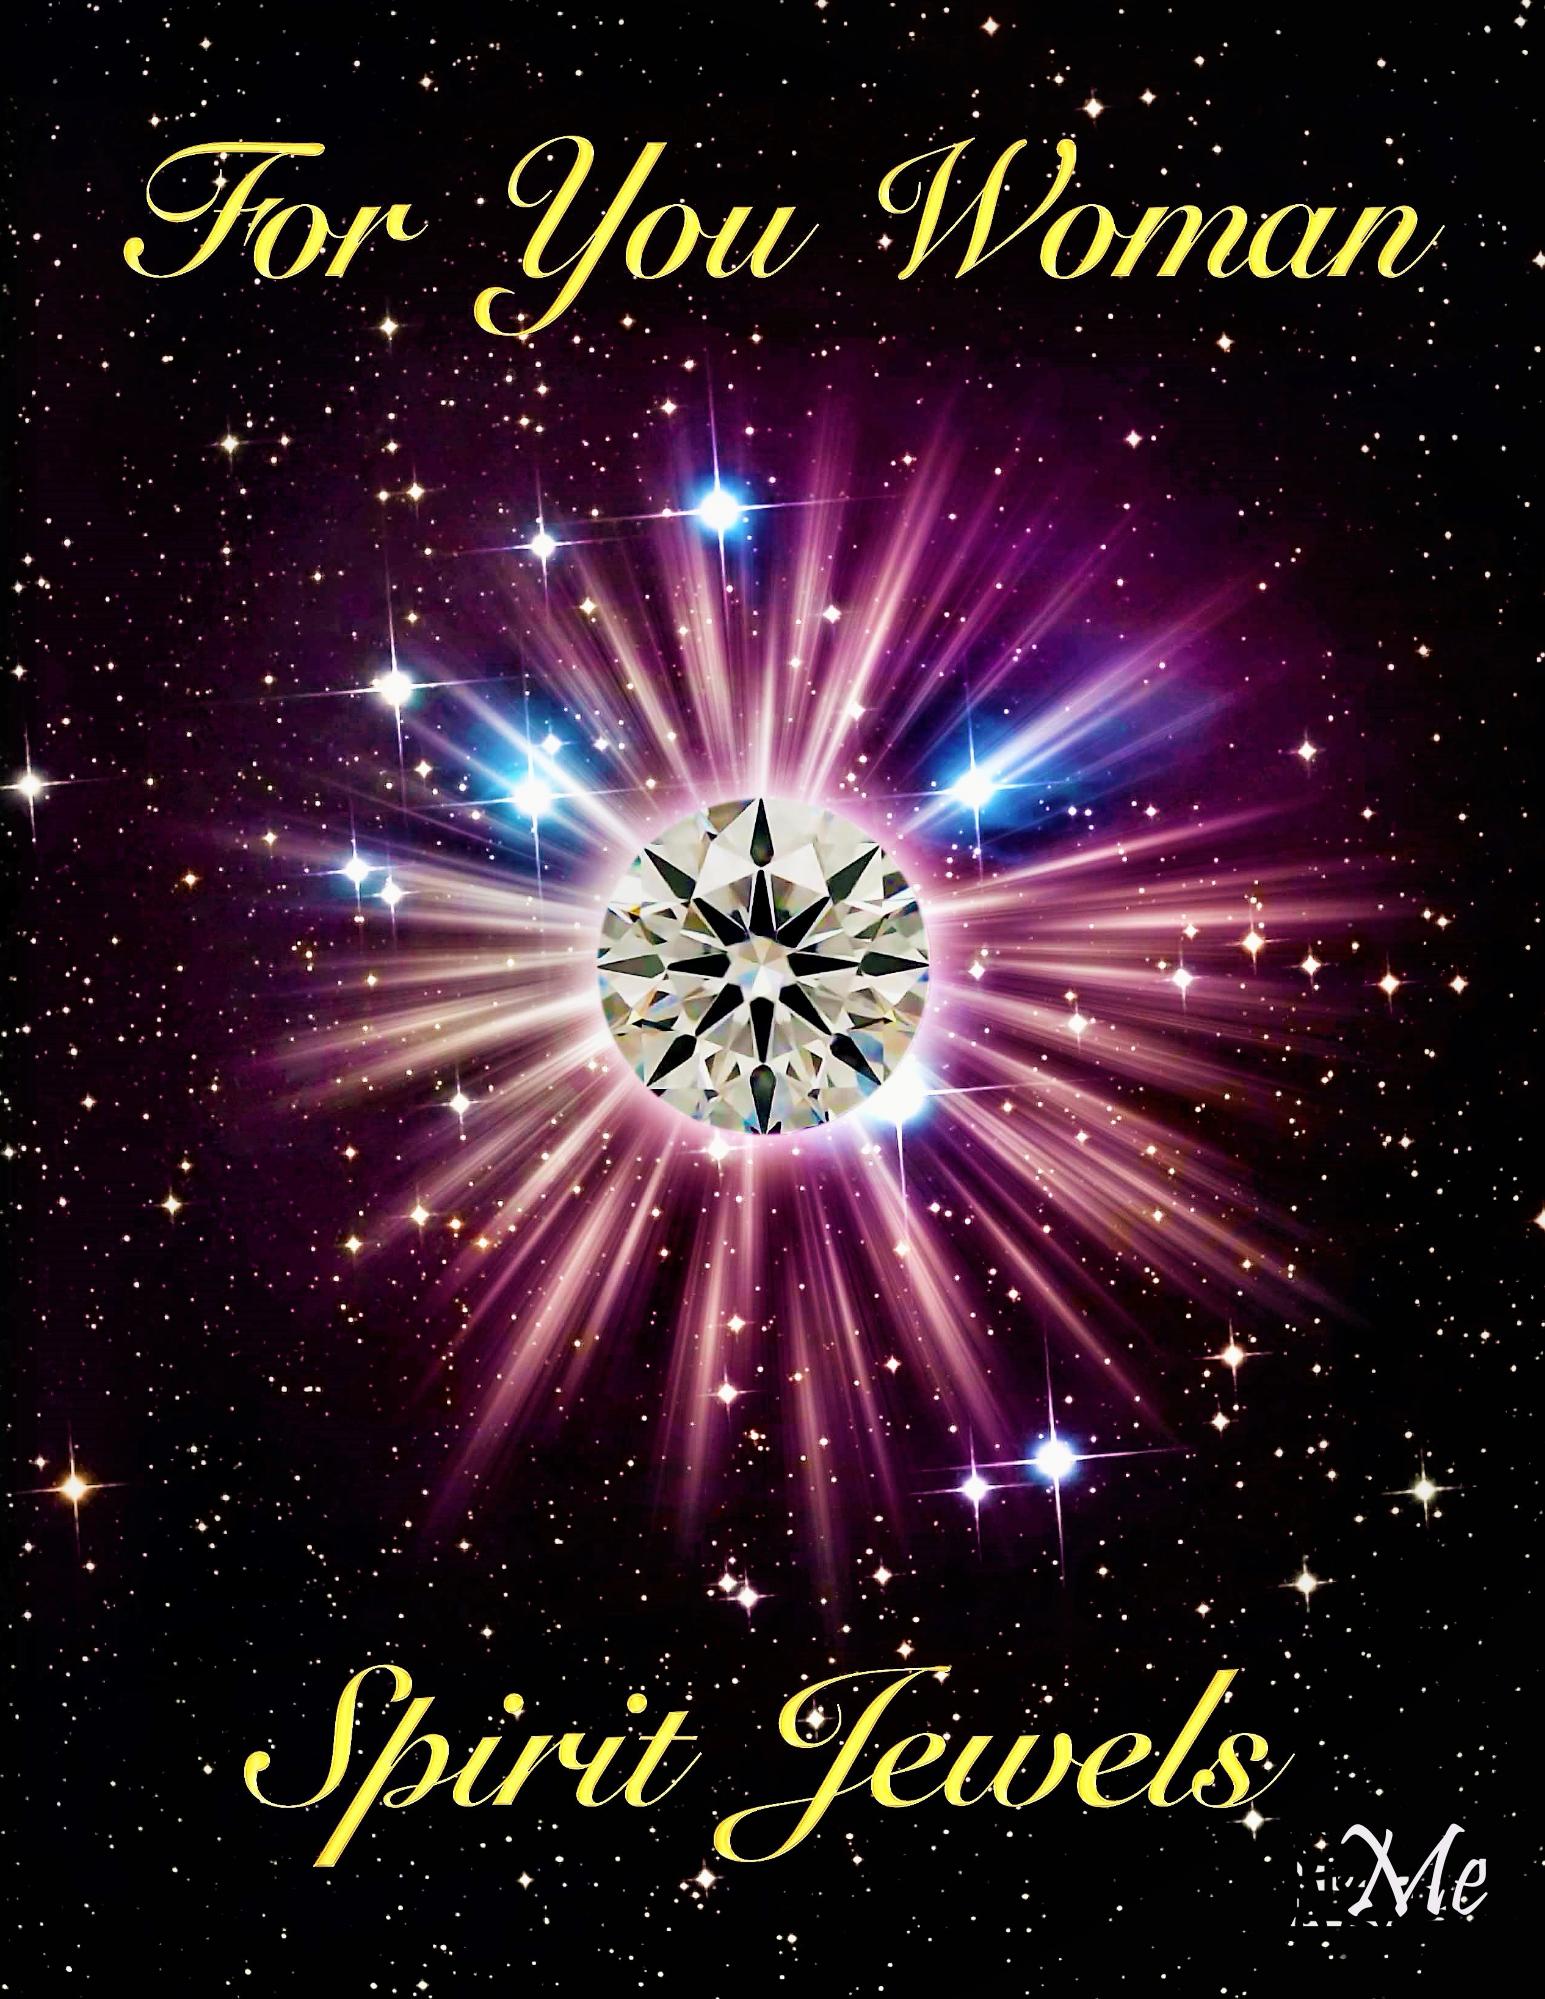 //spiritjewelsinc.com/wp-content/uploads/2018/06/FOR_YOU_WOMAN_Spiri_Cover_for_Kindle.jpg